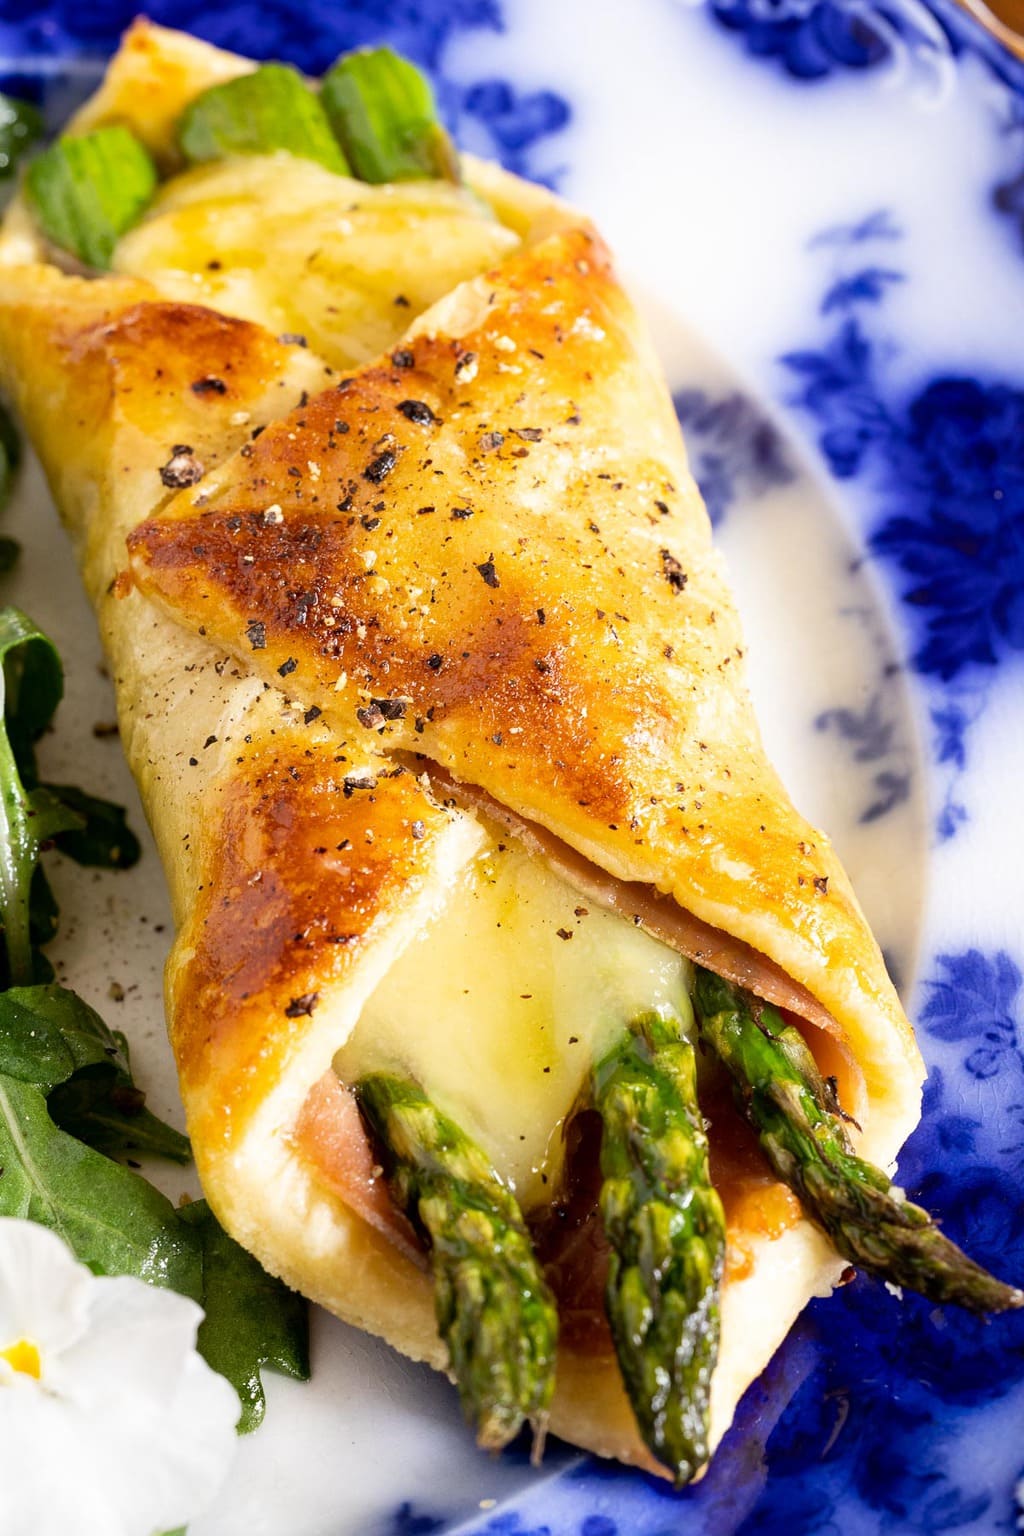 Vertical closeup photo of a Honey-Glazed Asparagus Prosciutto Puff Pastry Wrap on a Flo blue serving plate.